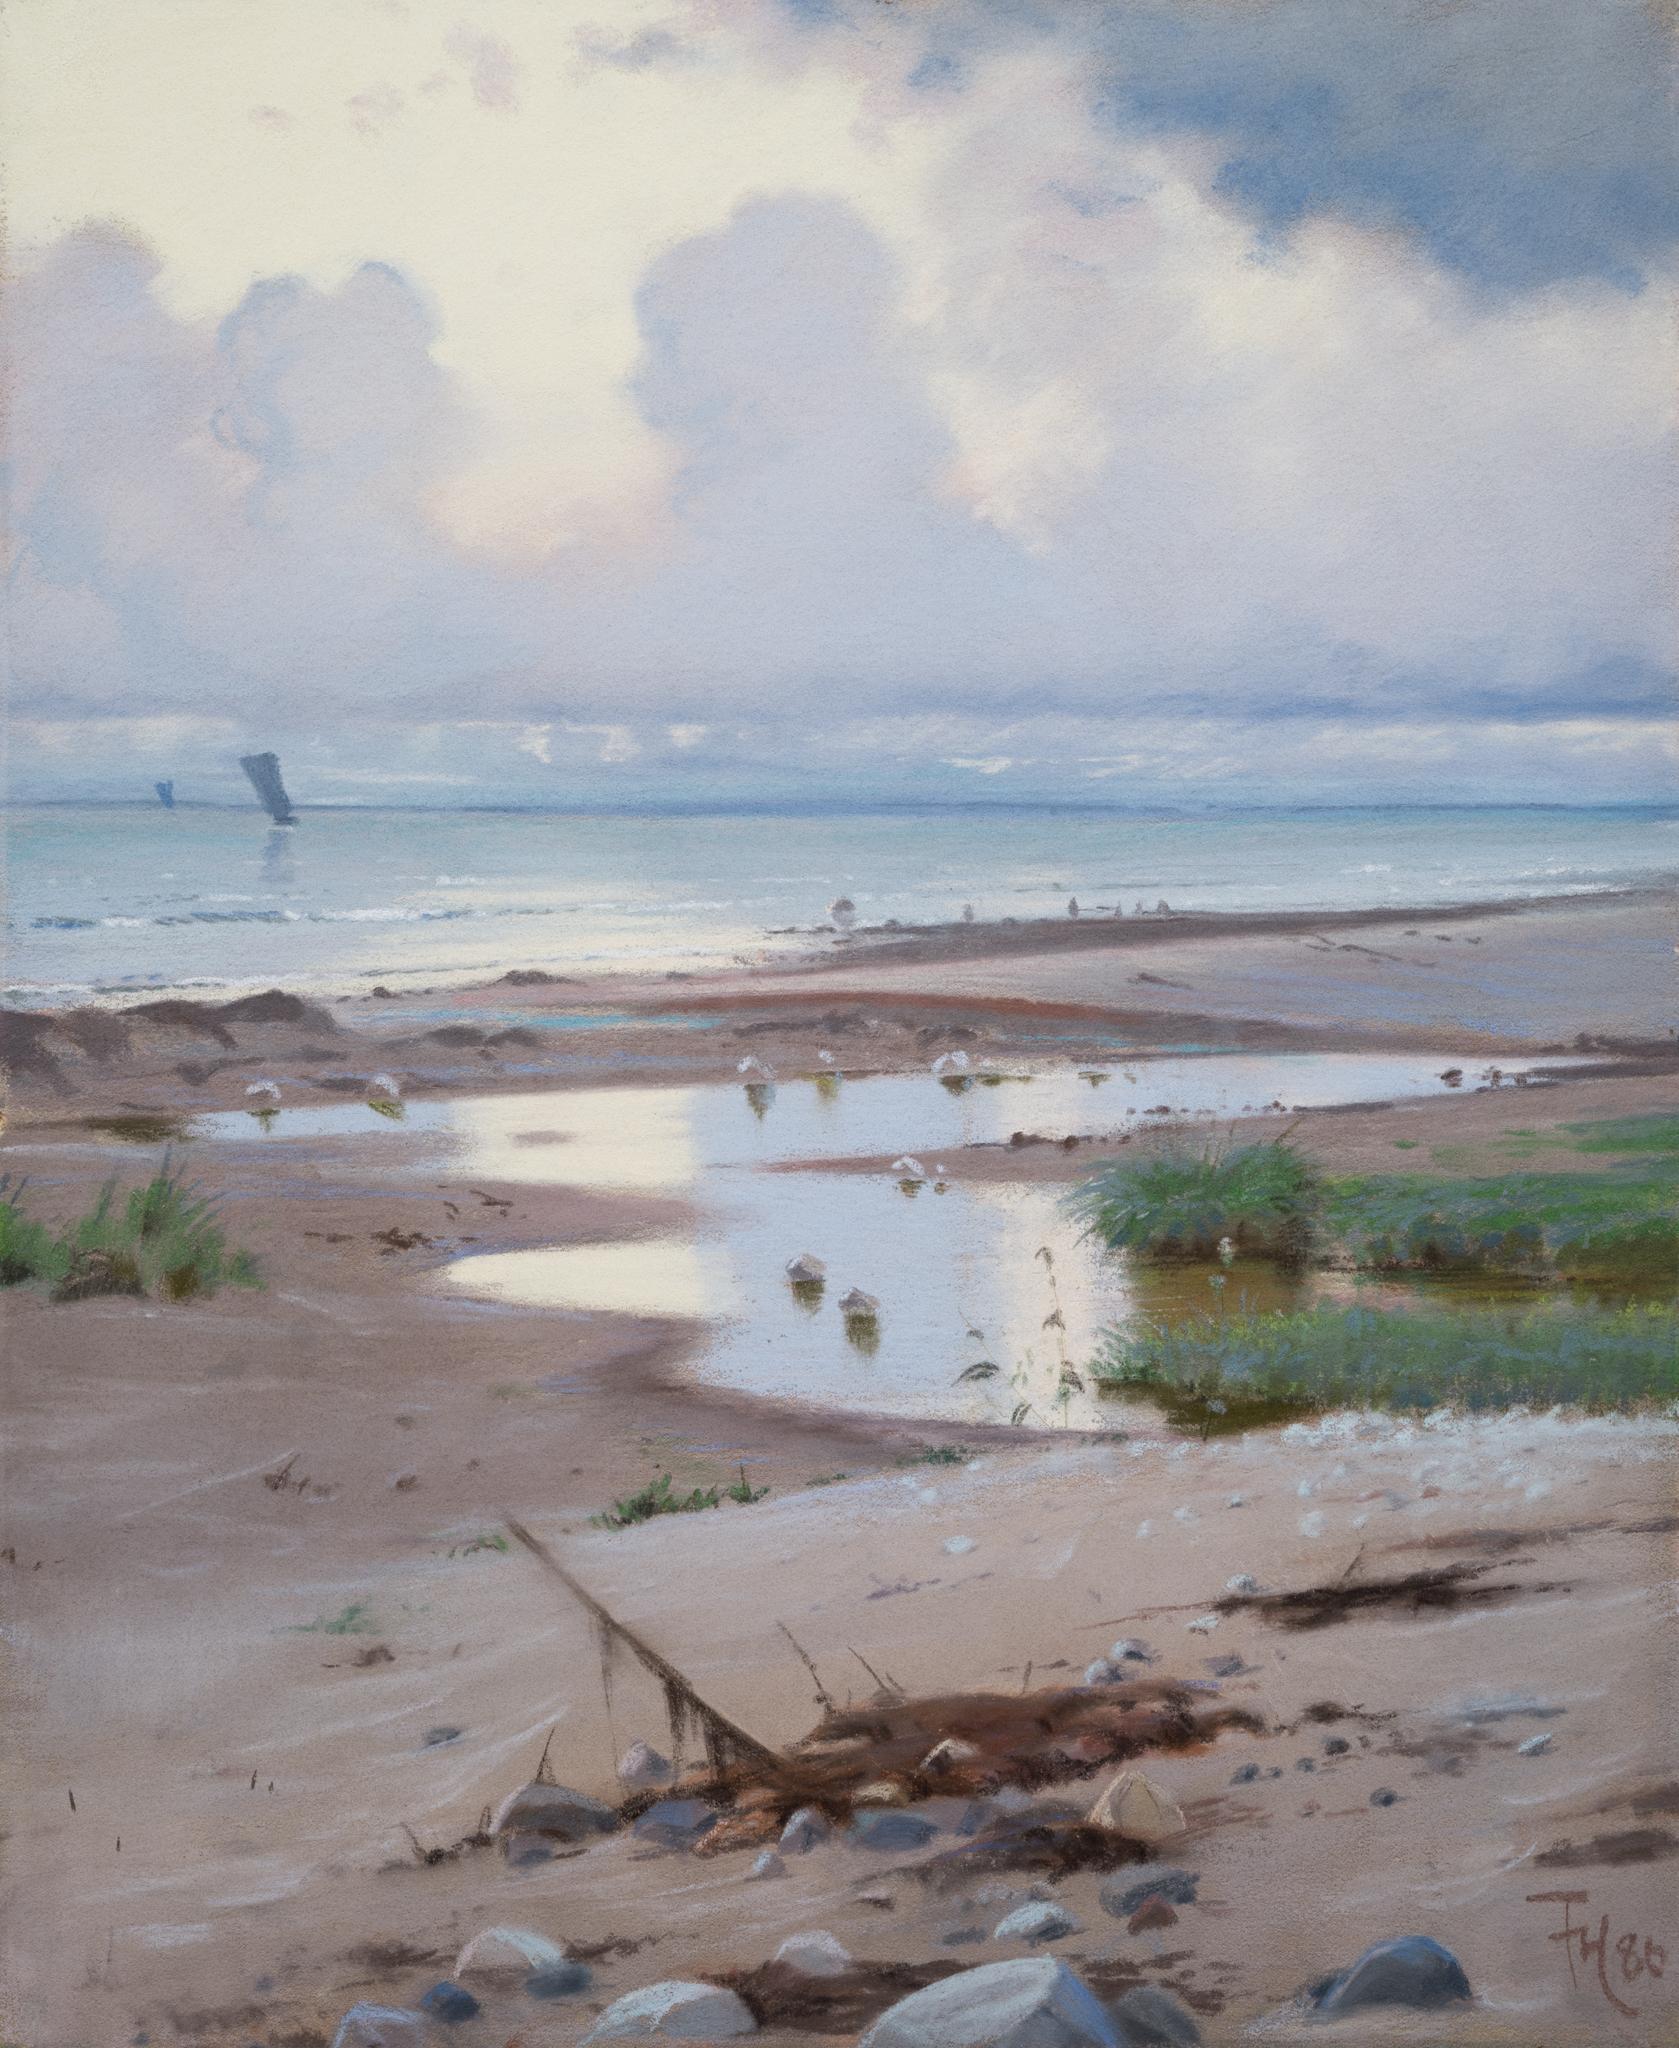 A Pastel Painted 1886 Called A Summer's Day on Hornbæk Beach - Art by Frants Henningsen 